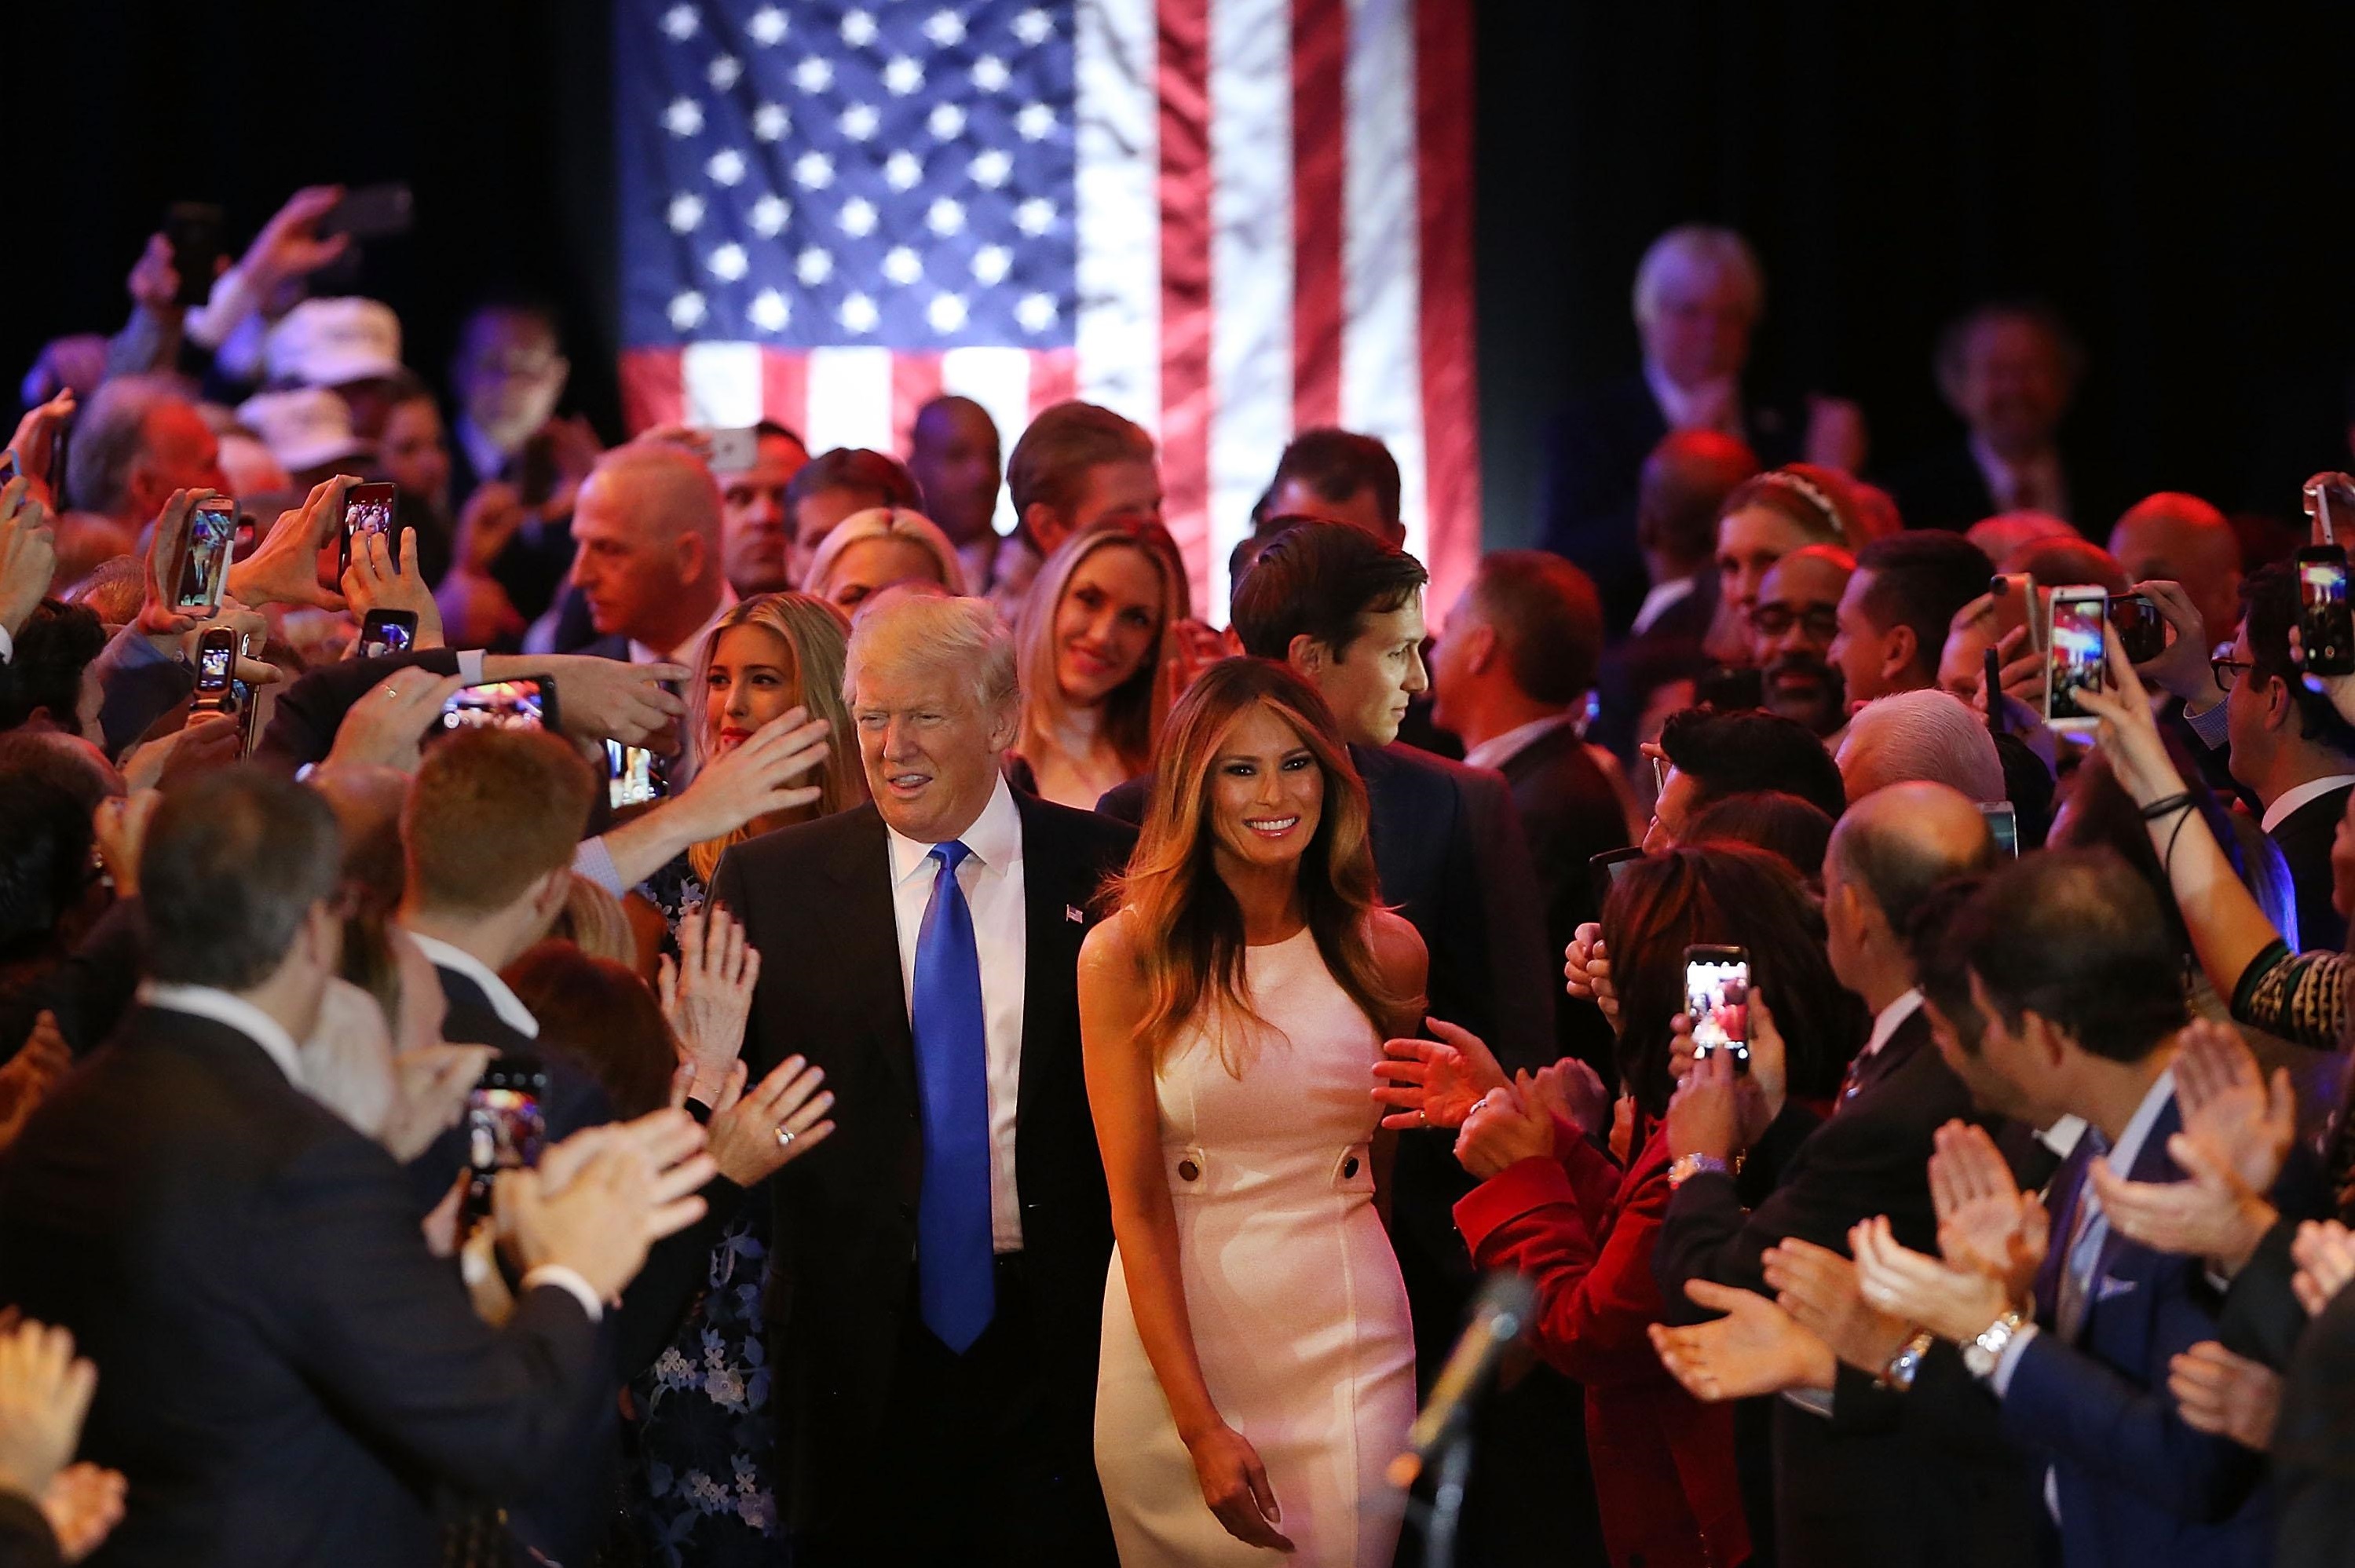 Republican presidential candidate Donald Trump and his wife, Melania, arrive to speak to supporters at Trump Tower in Manhattan on Tuesday following his victory in the Indiana primary. | GETTY / KYODO